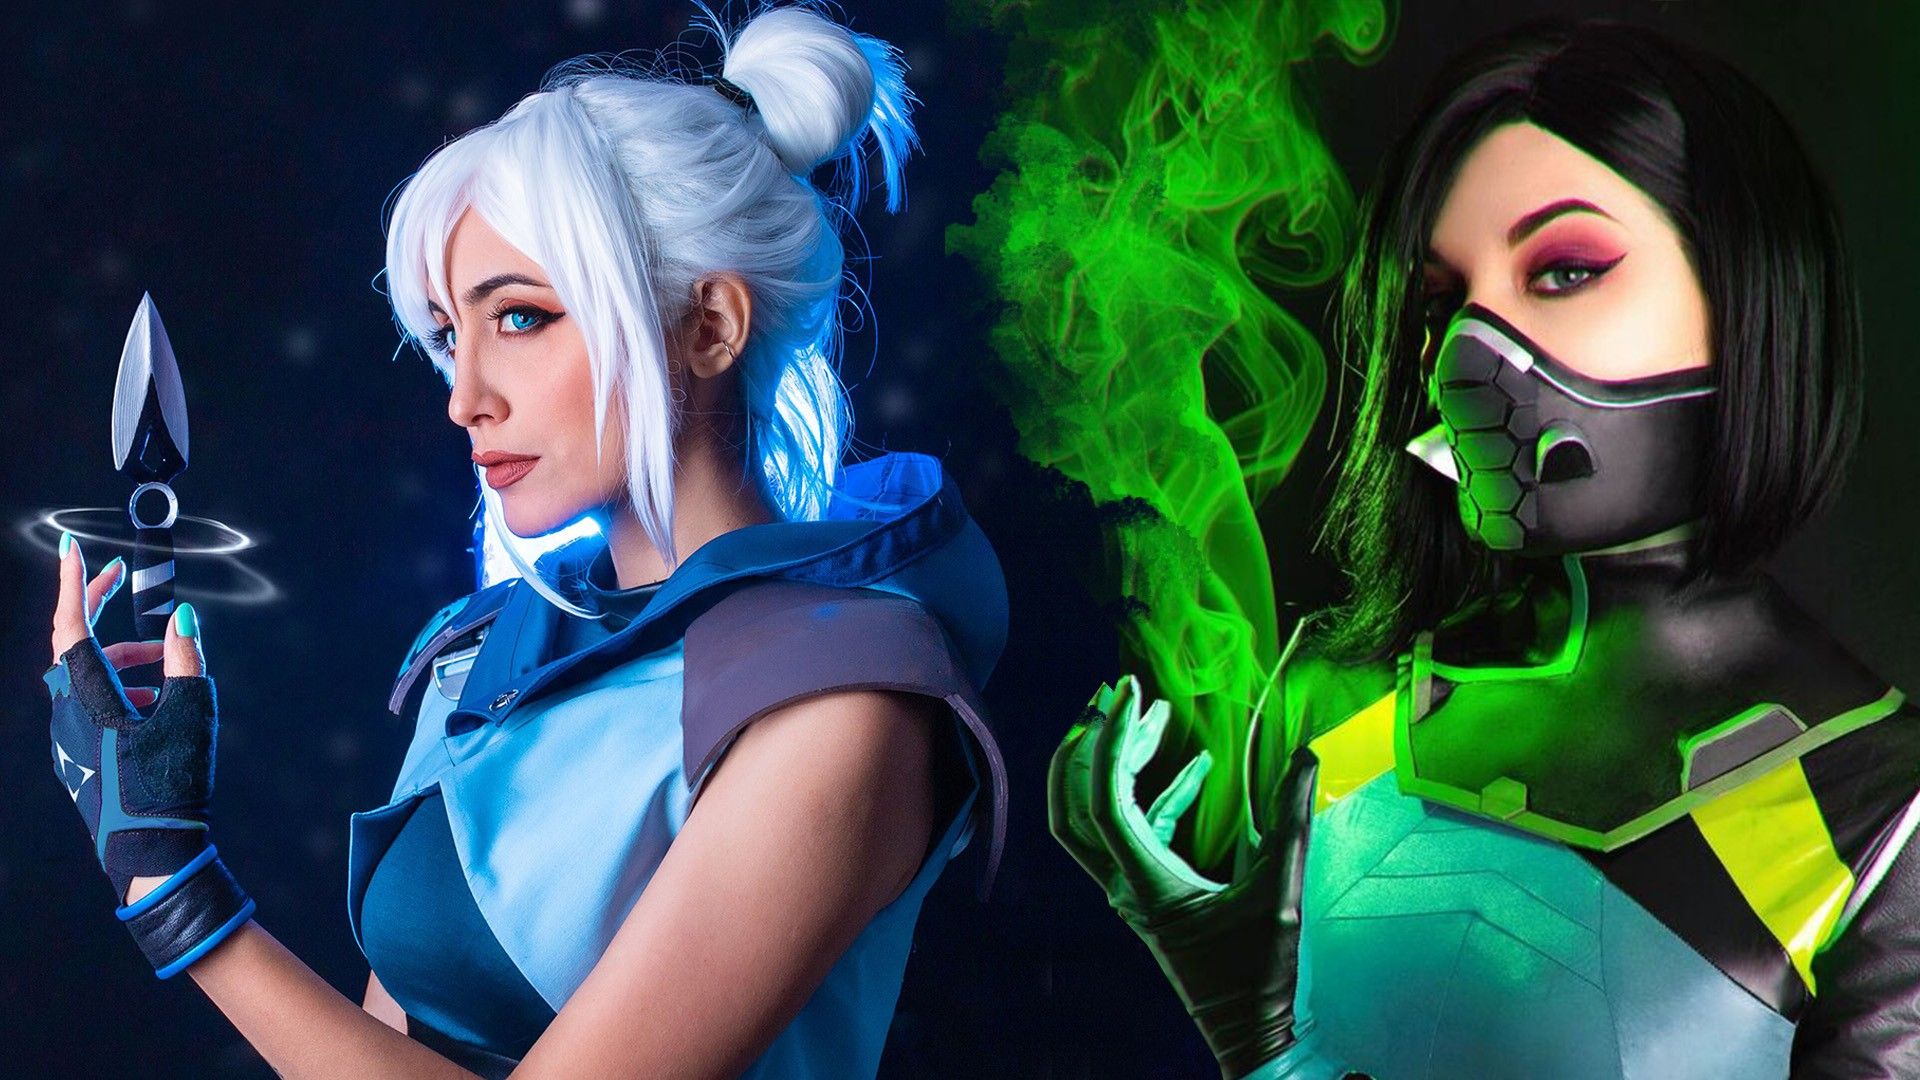 VALORANT Cosplay by Peyton and Glory Lamothe